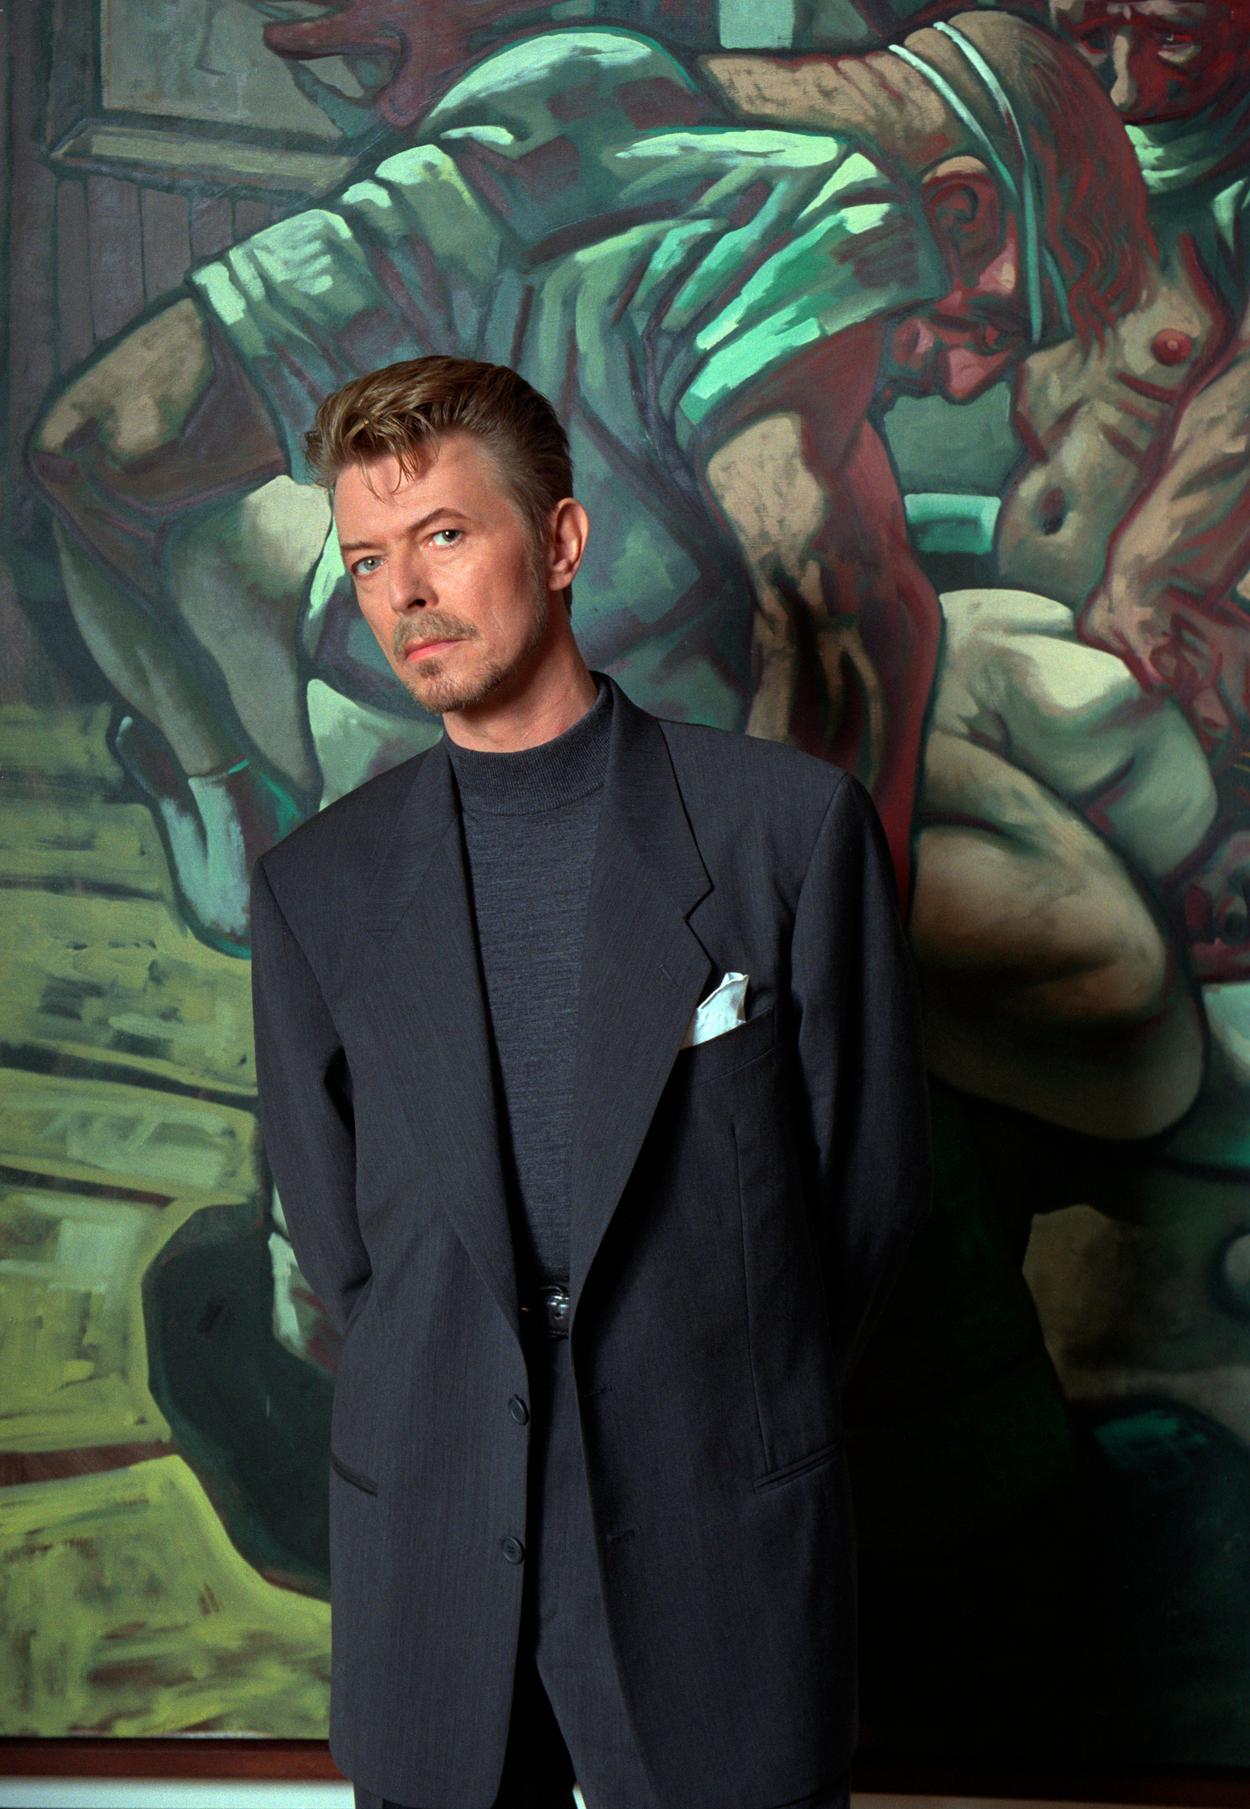 Richard Young Color Photograph - David Bowie with a Painting by Peter Howson, London, 1994, Photography